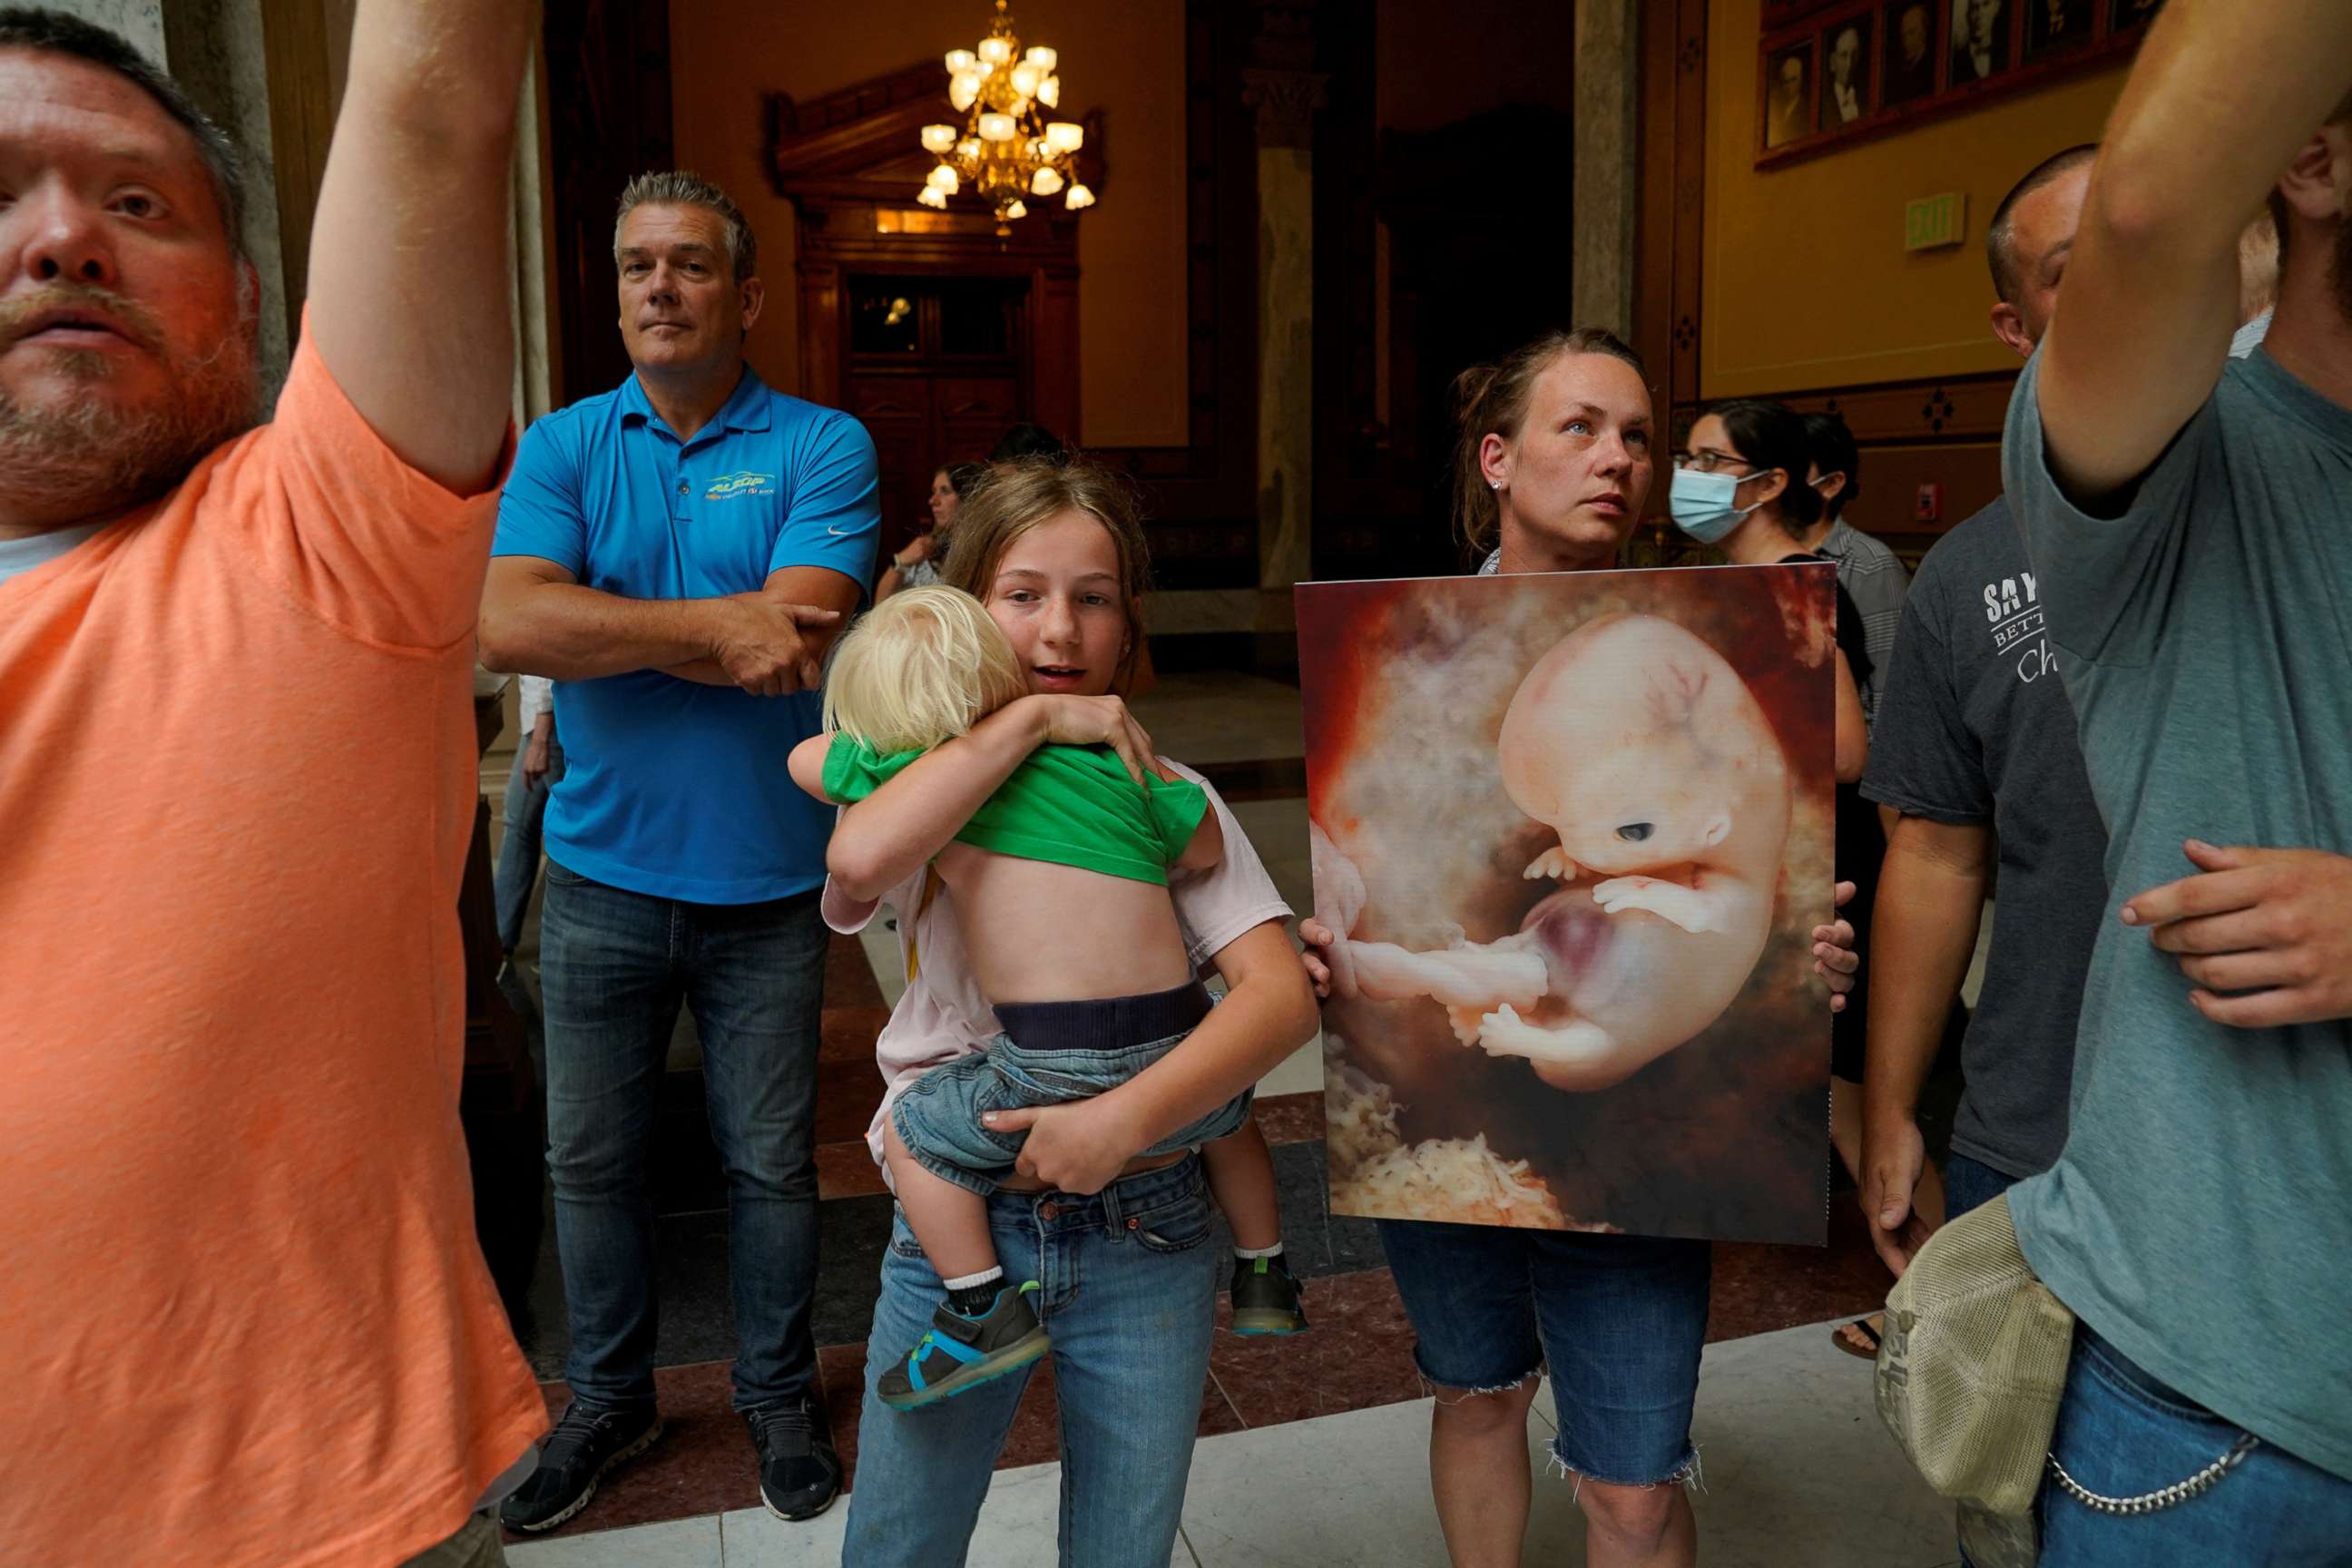 PHOTO: Anti-abortion activists protest in the Indiana Statehouse during a special session debating on banning abortion in Indianapolis, July 25, 2022.